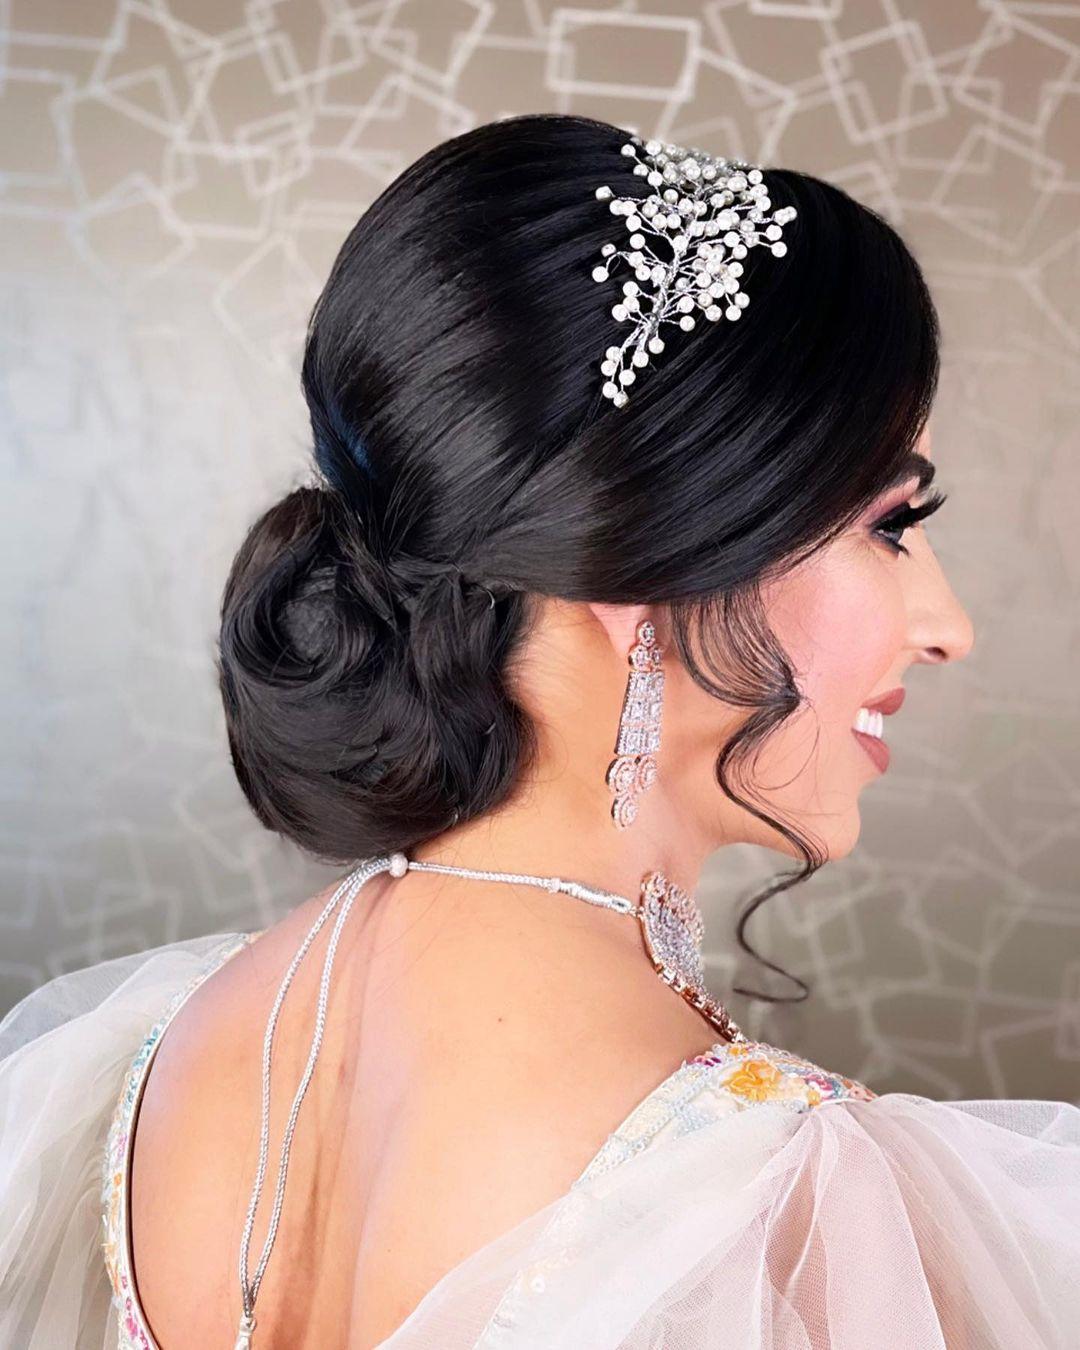 ❤️ Top 15 Wedding Hairstyles for 2022 Trends - Emma Loves Weddings